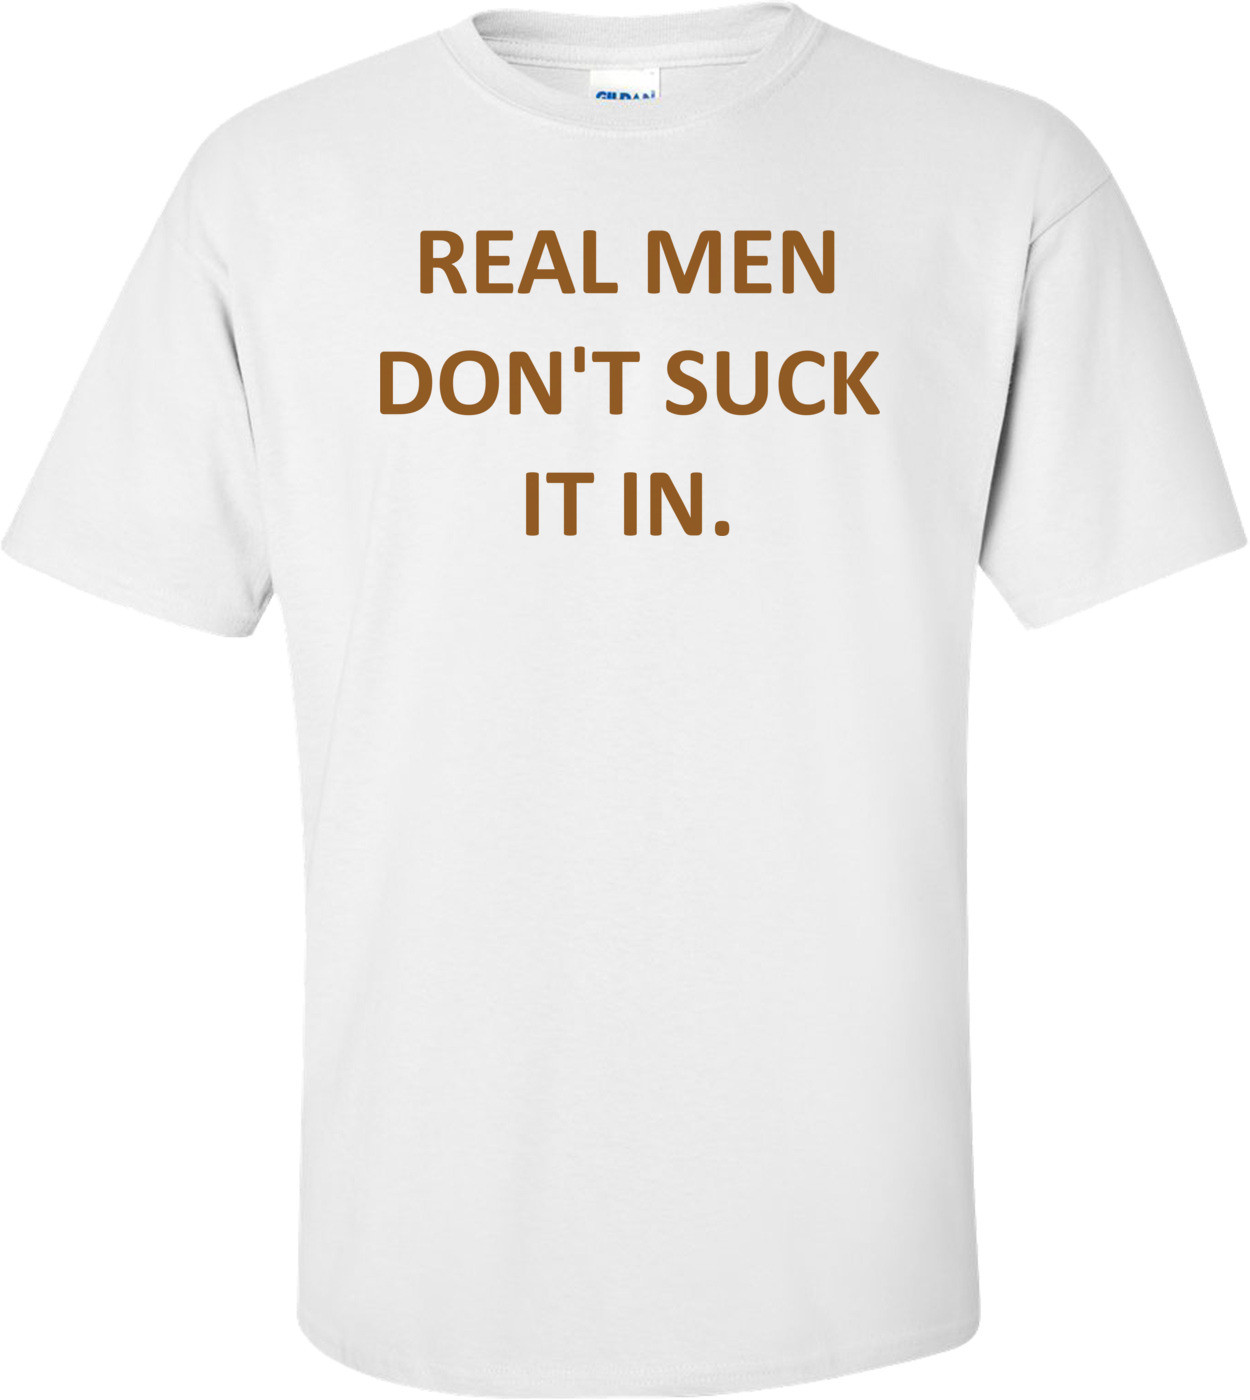 REAL MEN DON'T SUCK IT IN. Shirt